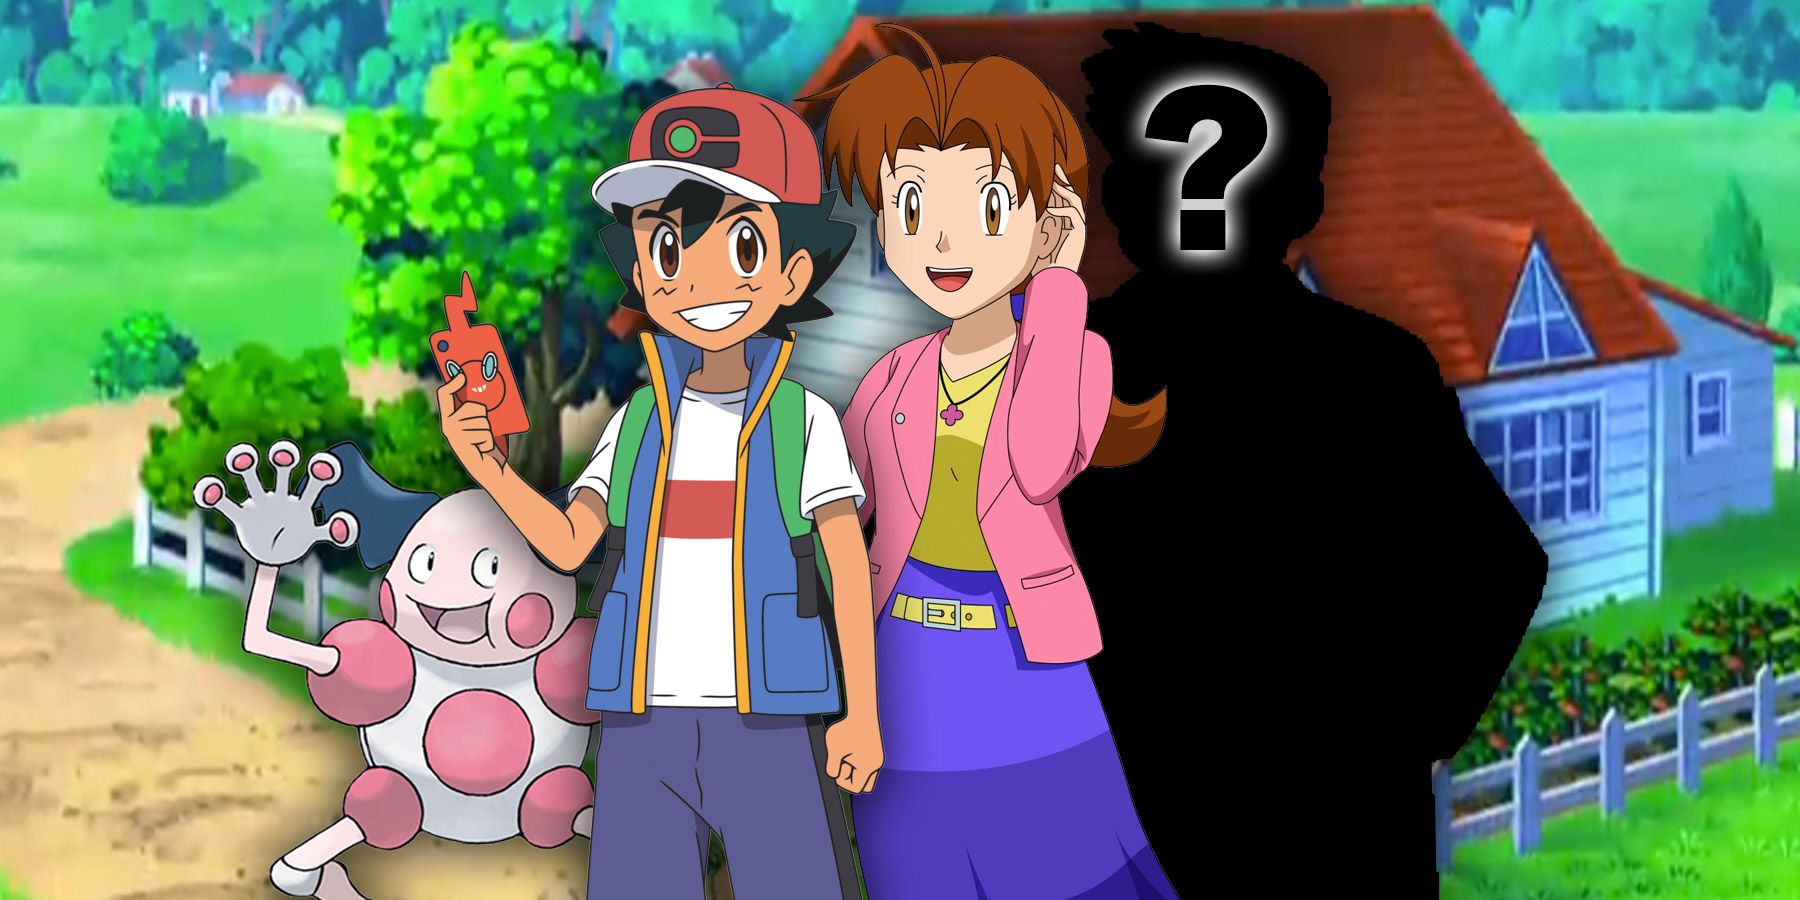 New Pokémon anime will end Ash Ketchum's story after 25 years | EW.com